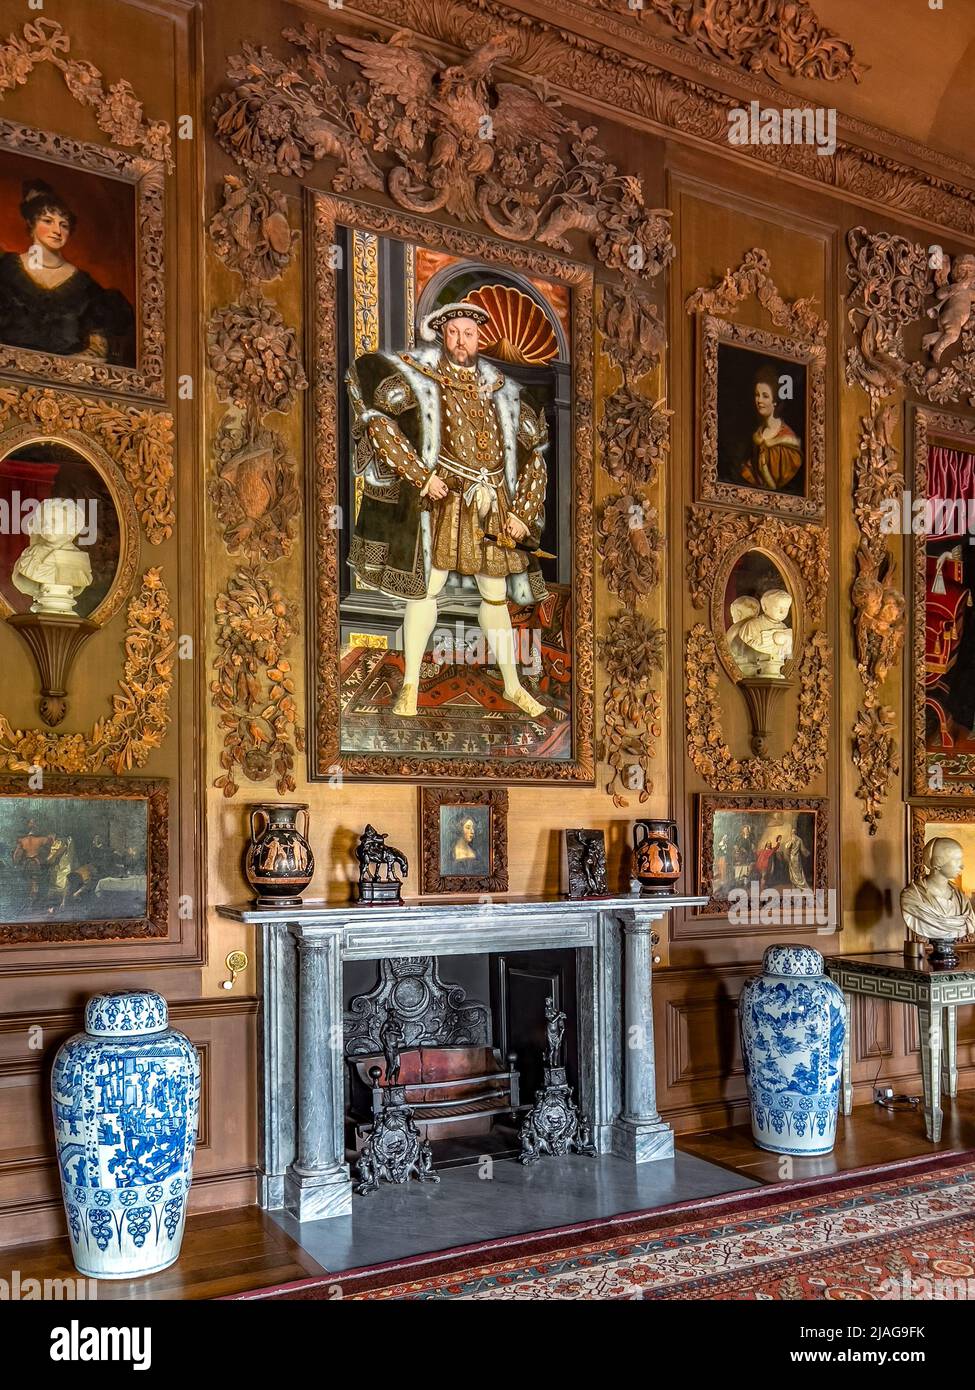 The Carved Room at Petworth House in West Sussex, United Kingdom.  Petworth is a late 17th-century Grade I listed country house, rebuilt in 1688 by Ch Stock Photo